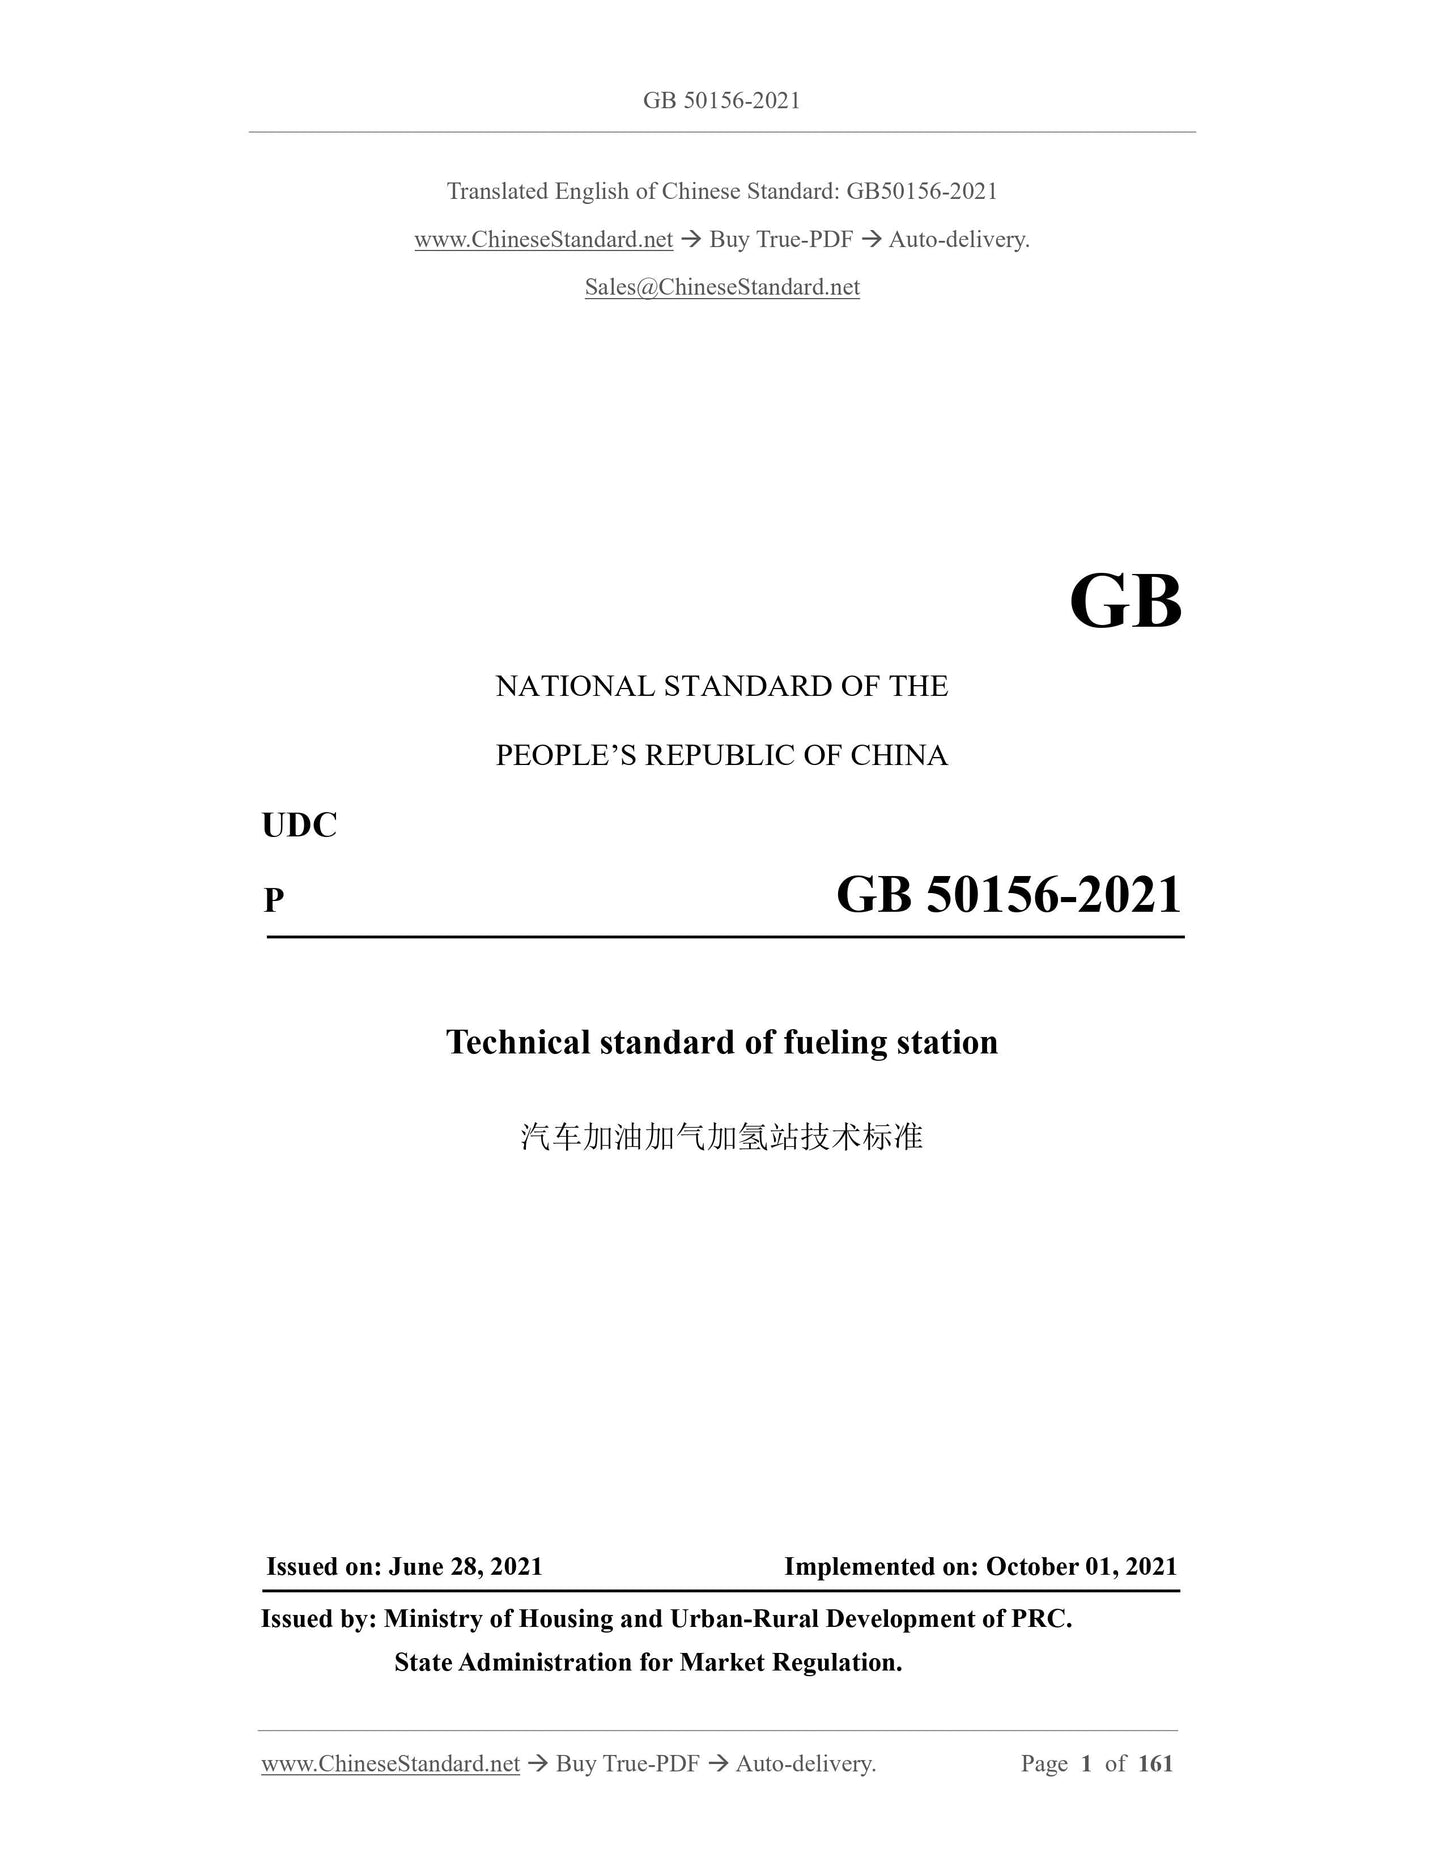 GB 50156-2021 Page 1